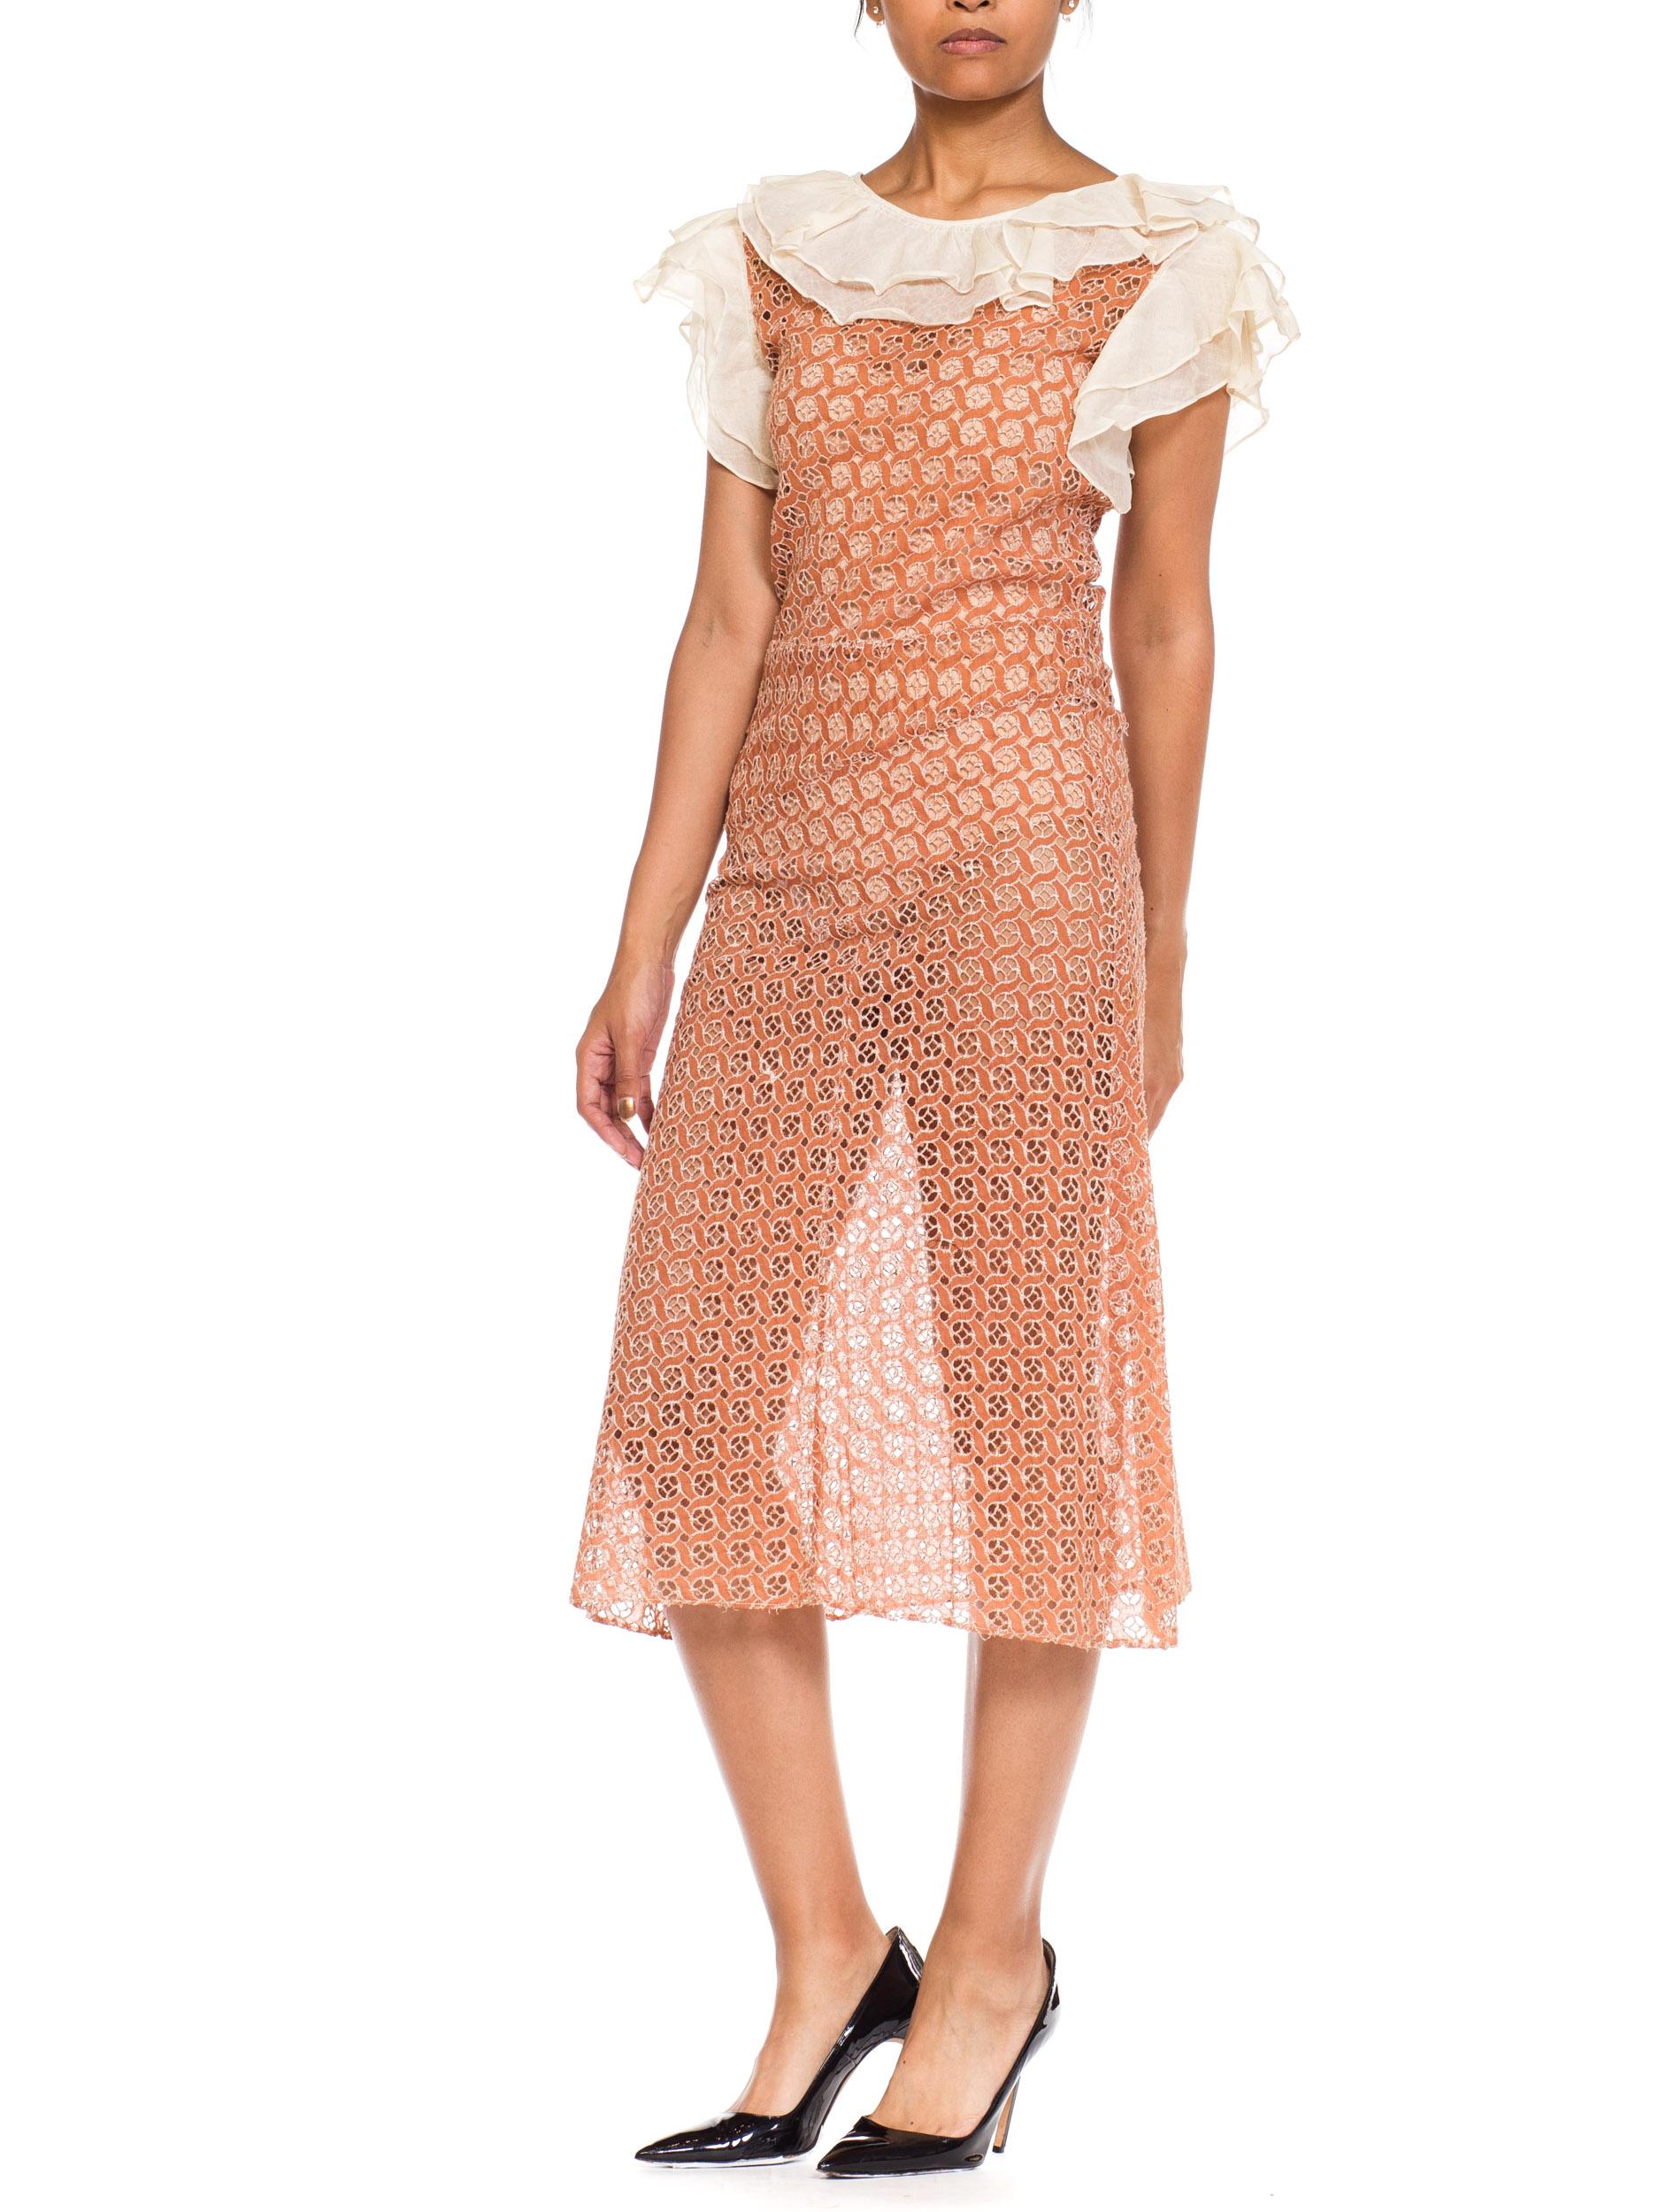 1930S Cotton Embroidered Geometric Eyelet Dress With Organdy Ruffles For Sale 6